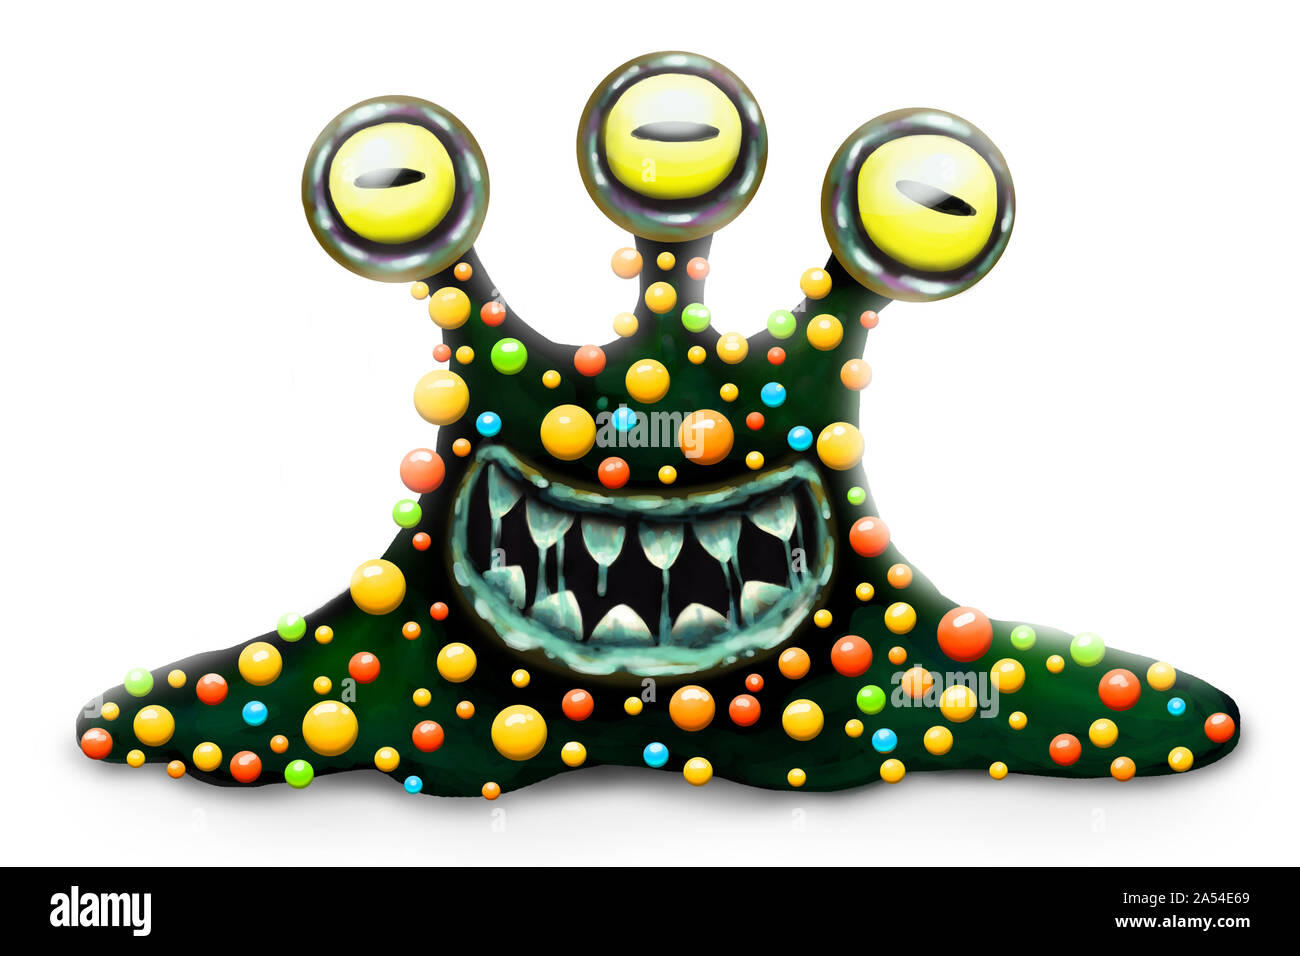 Funny and scary monster bacterium, cartoon children's toy hero for Halloween, isolated on white background. Toothy, slobbering, many eyed character. Stock Photo